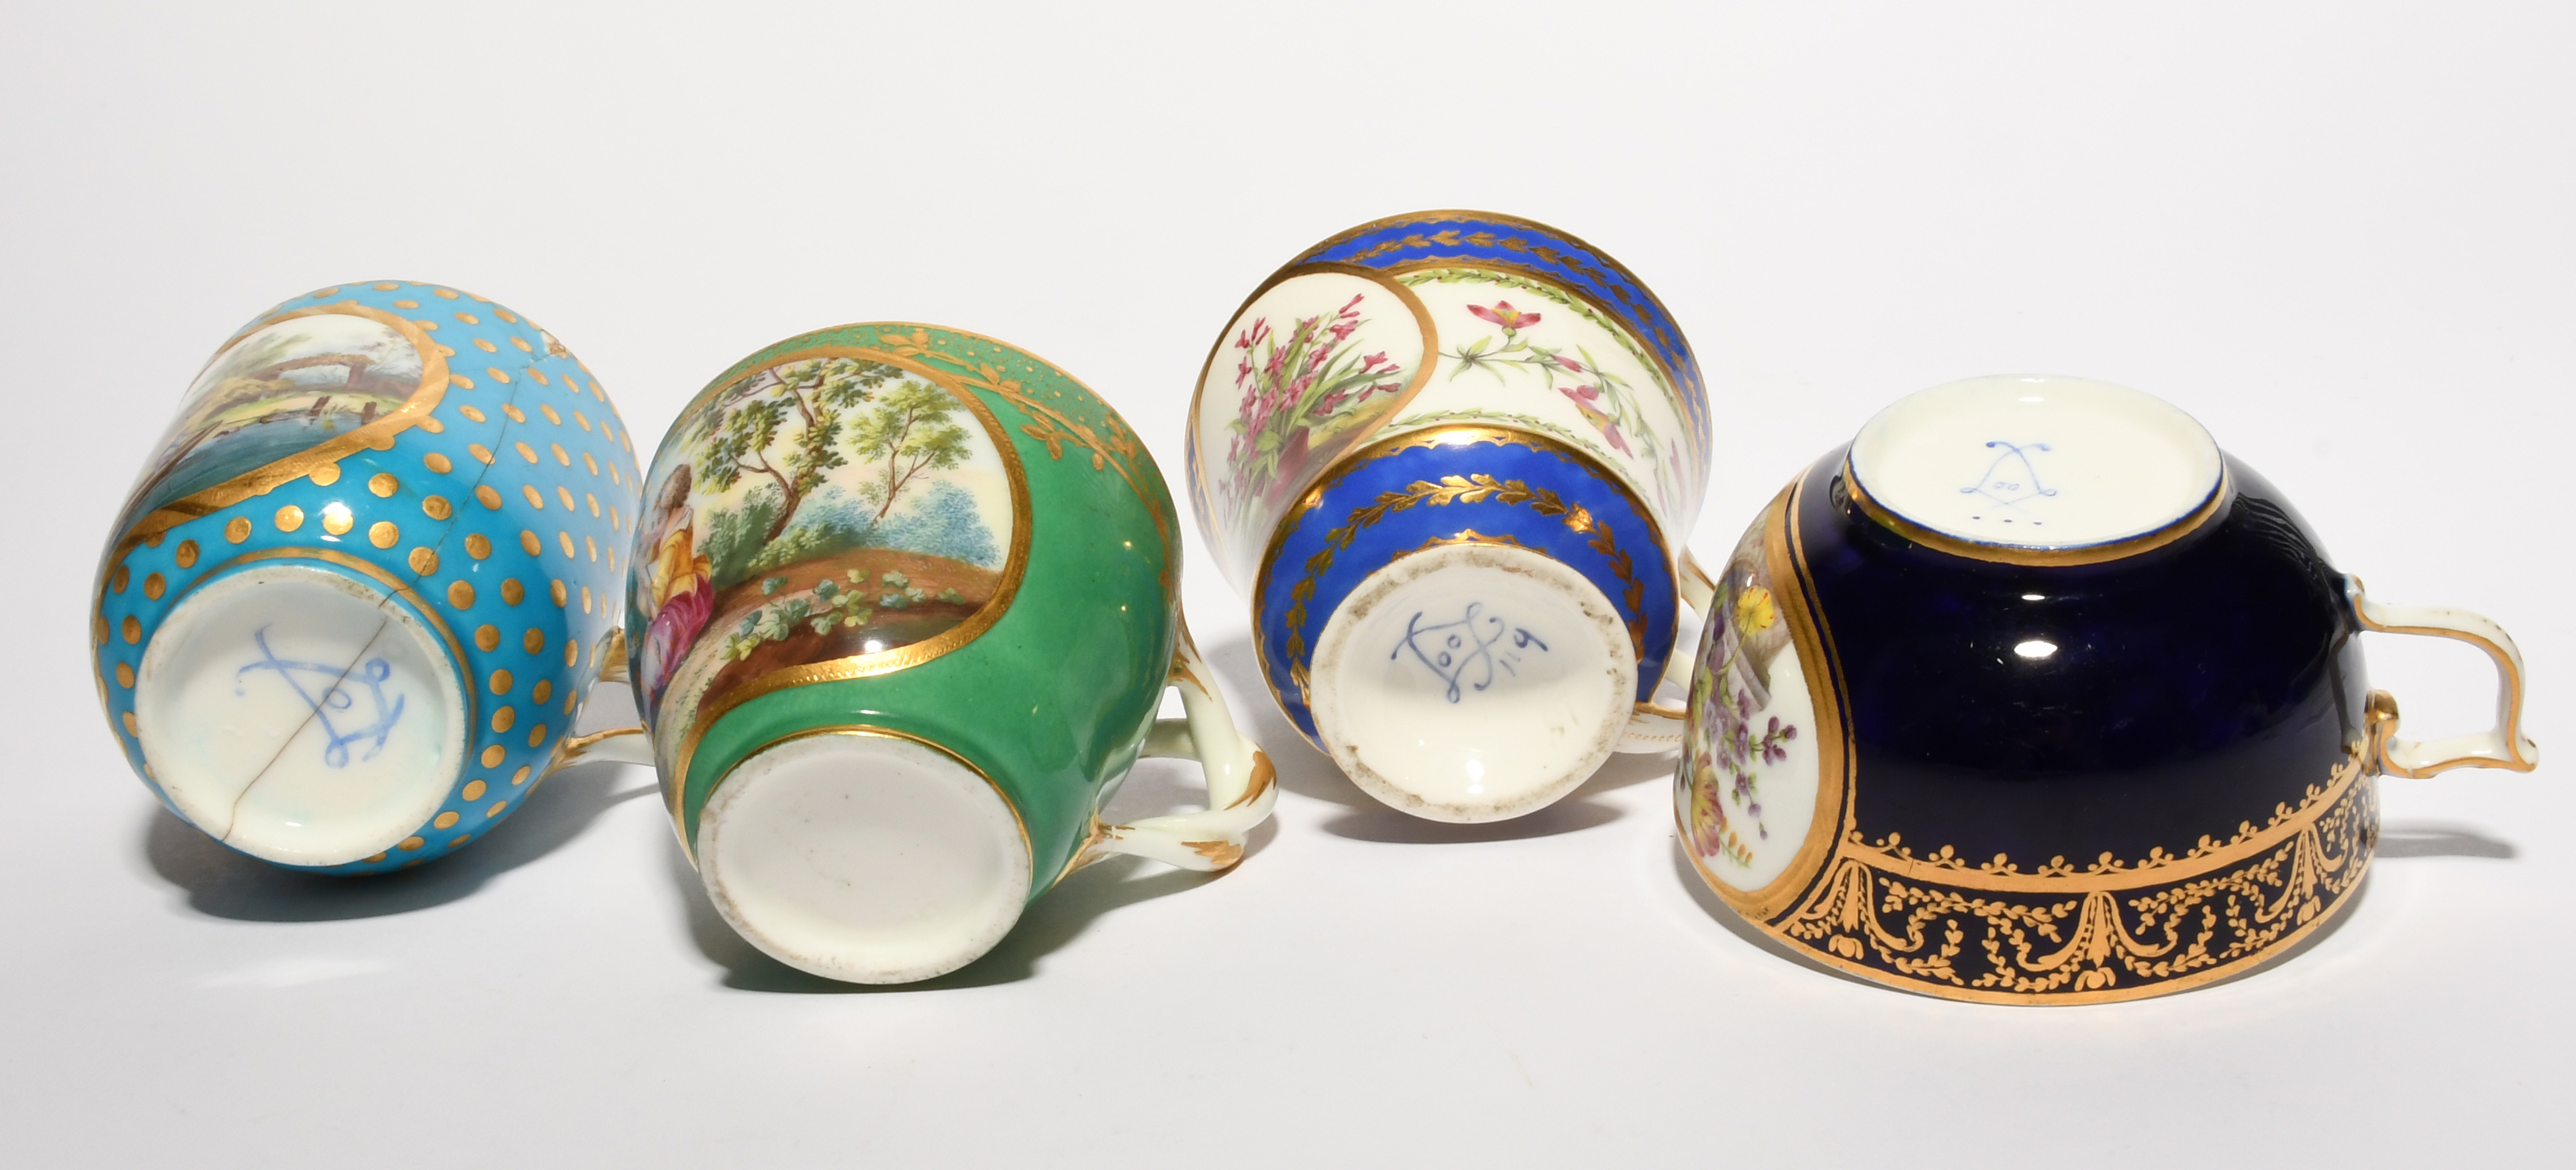 Four Sèvres cups, date codes for 1767 and 1791, one cup painted by Jean-Baptiste Tandart with - Image 3 of 3